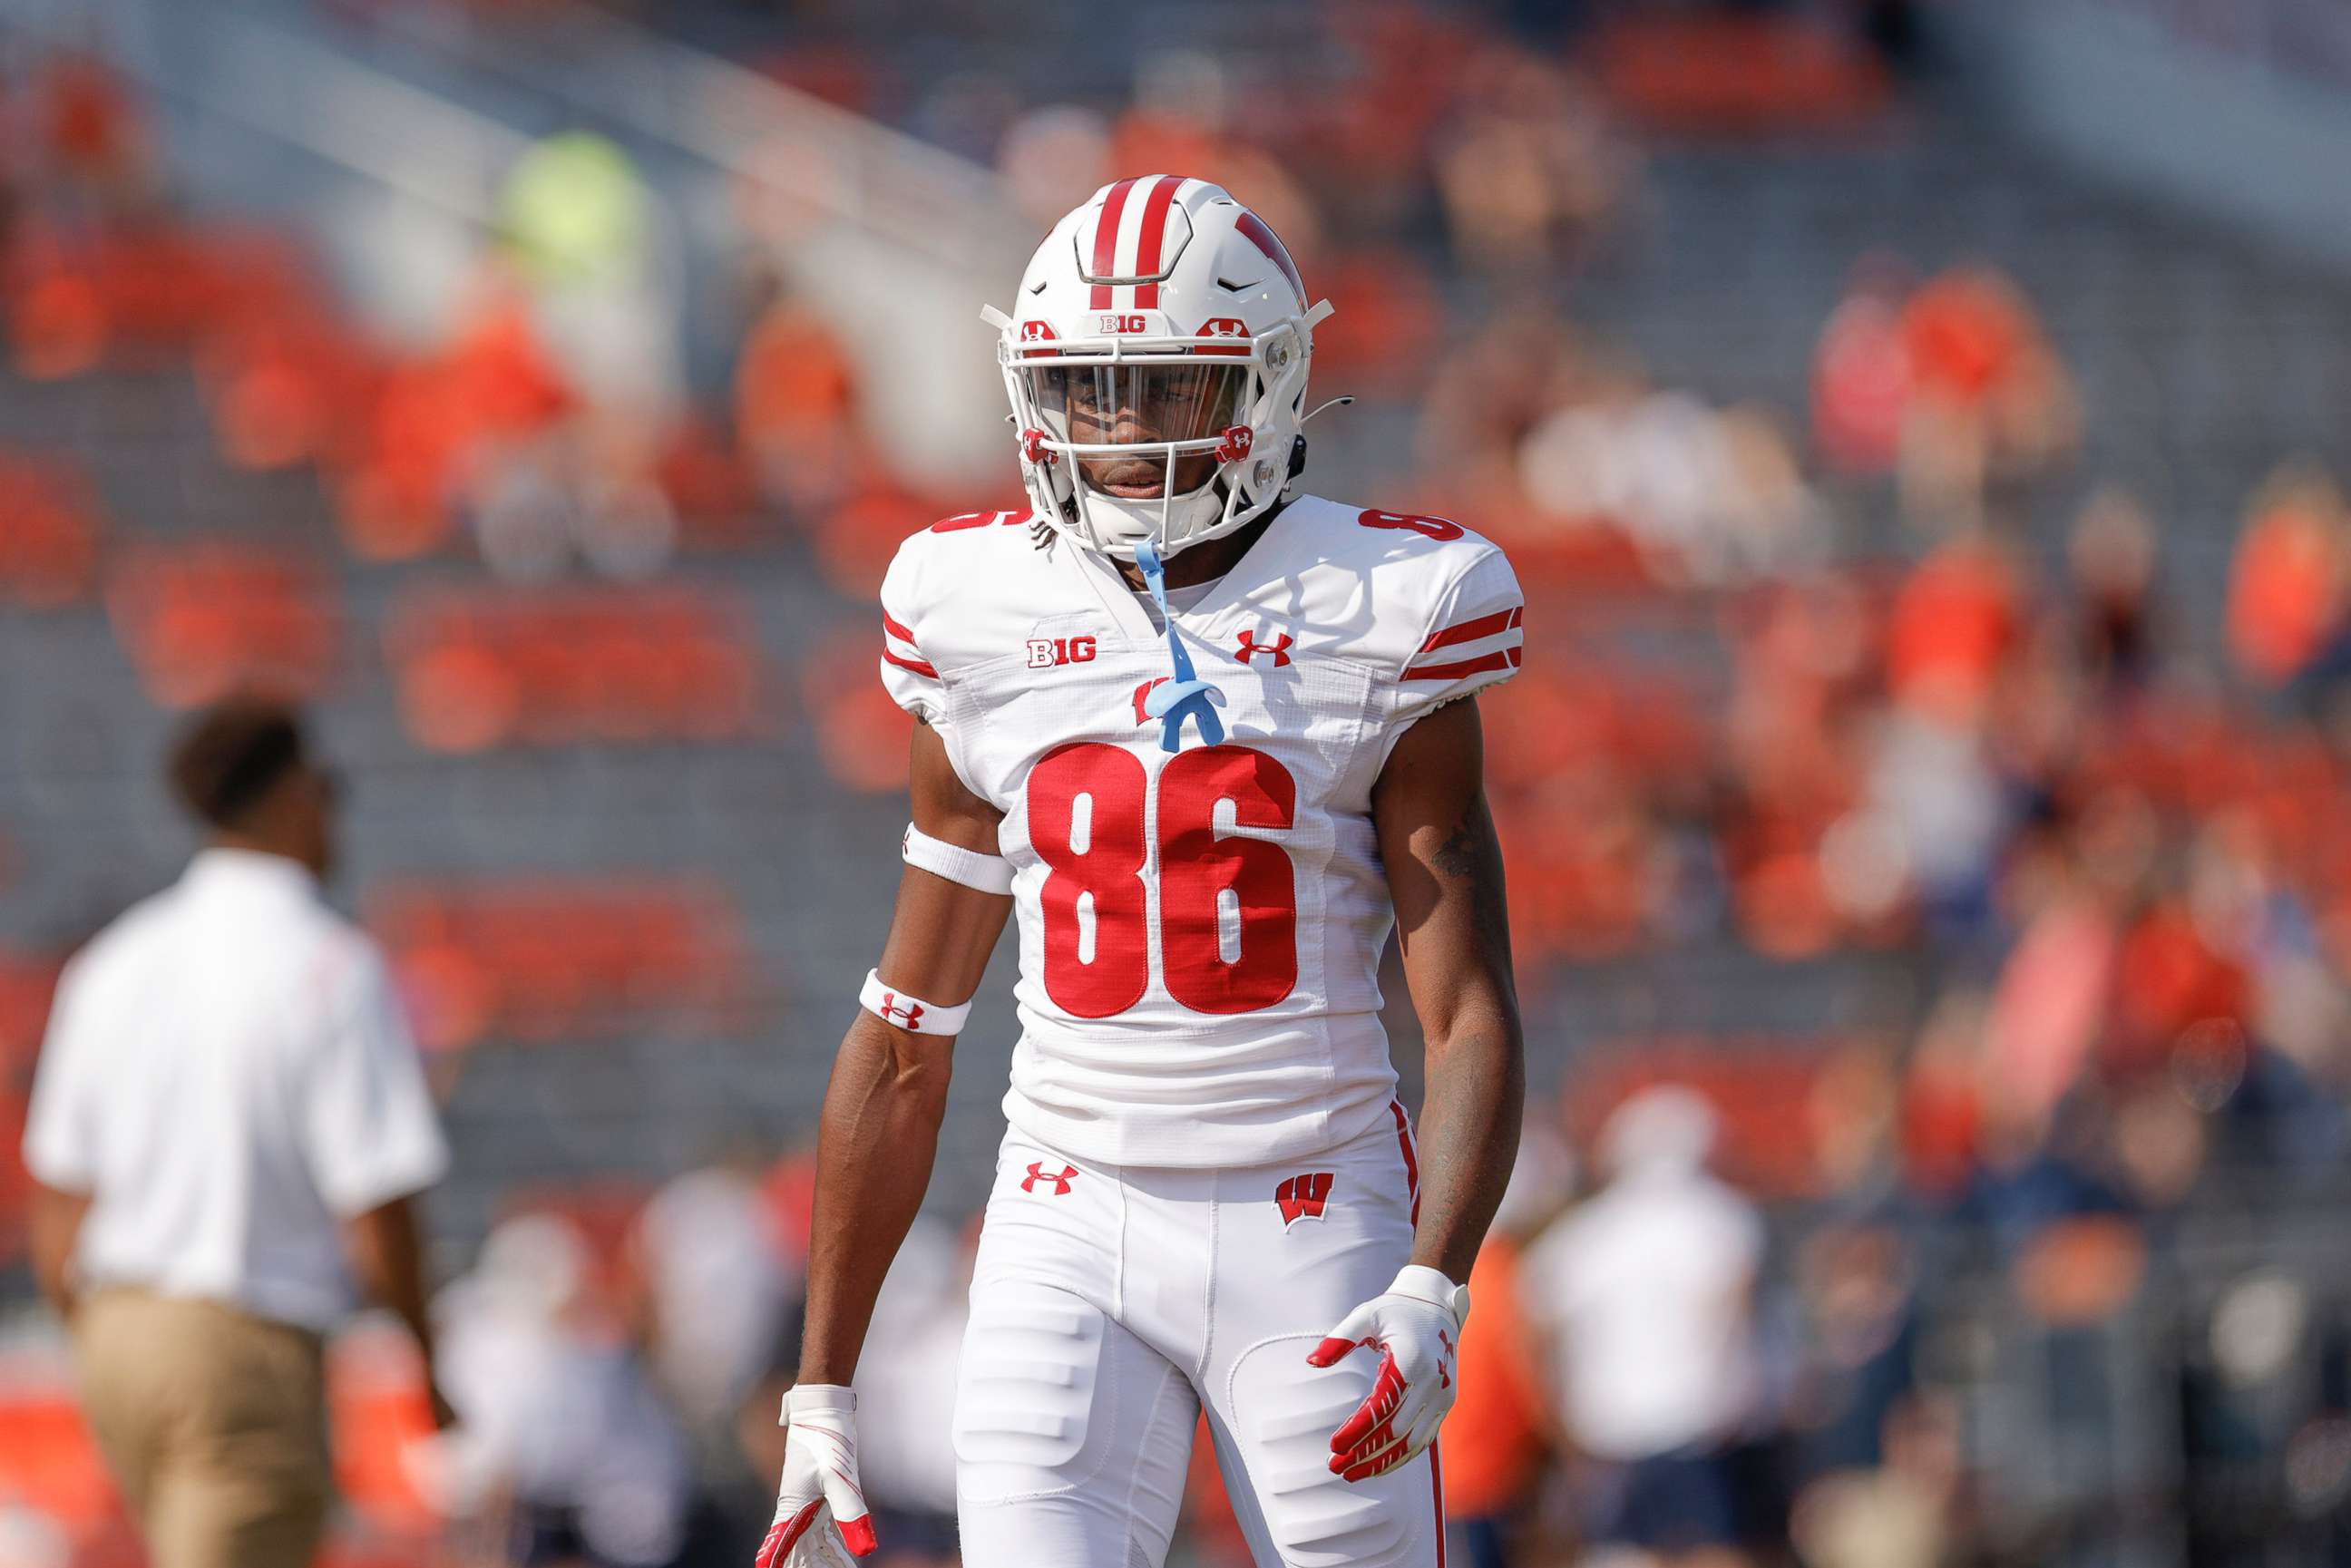 PHOTO: Devin Chandler #86 of the Wisconsin Badgers is seen before the game against the Illinois Fighting Illini at Memorial Stadium, Oct. 9, 2021 in Champaign, Illinois.